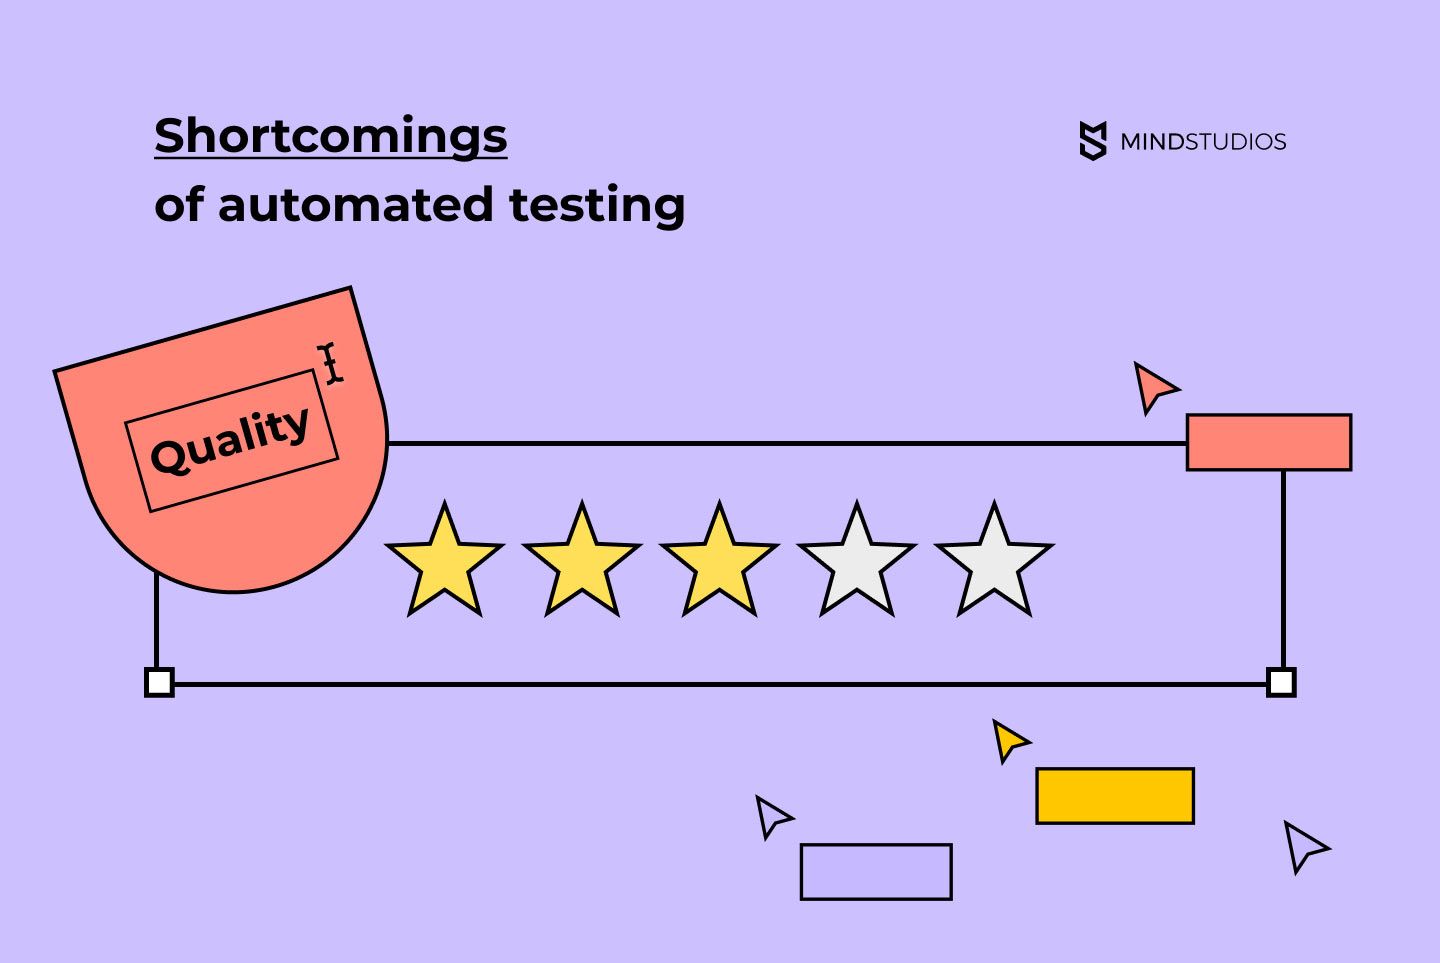 Shortcomings of automated testing